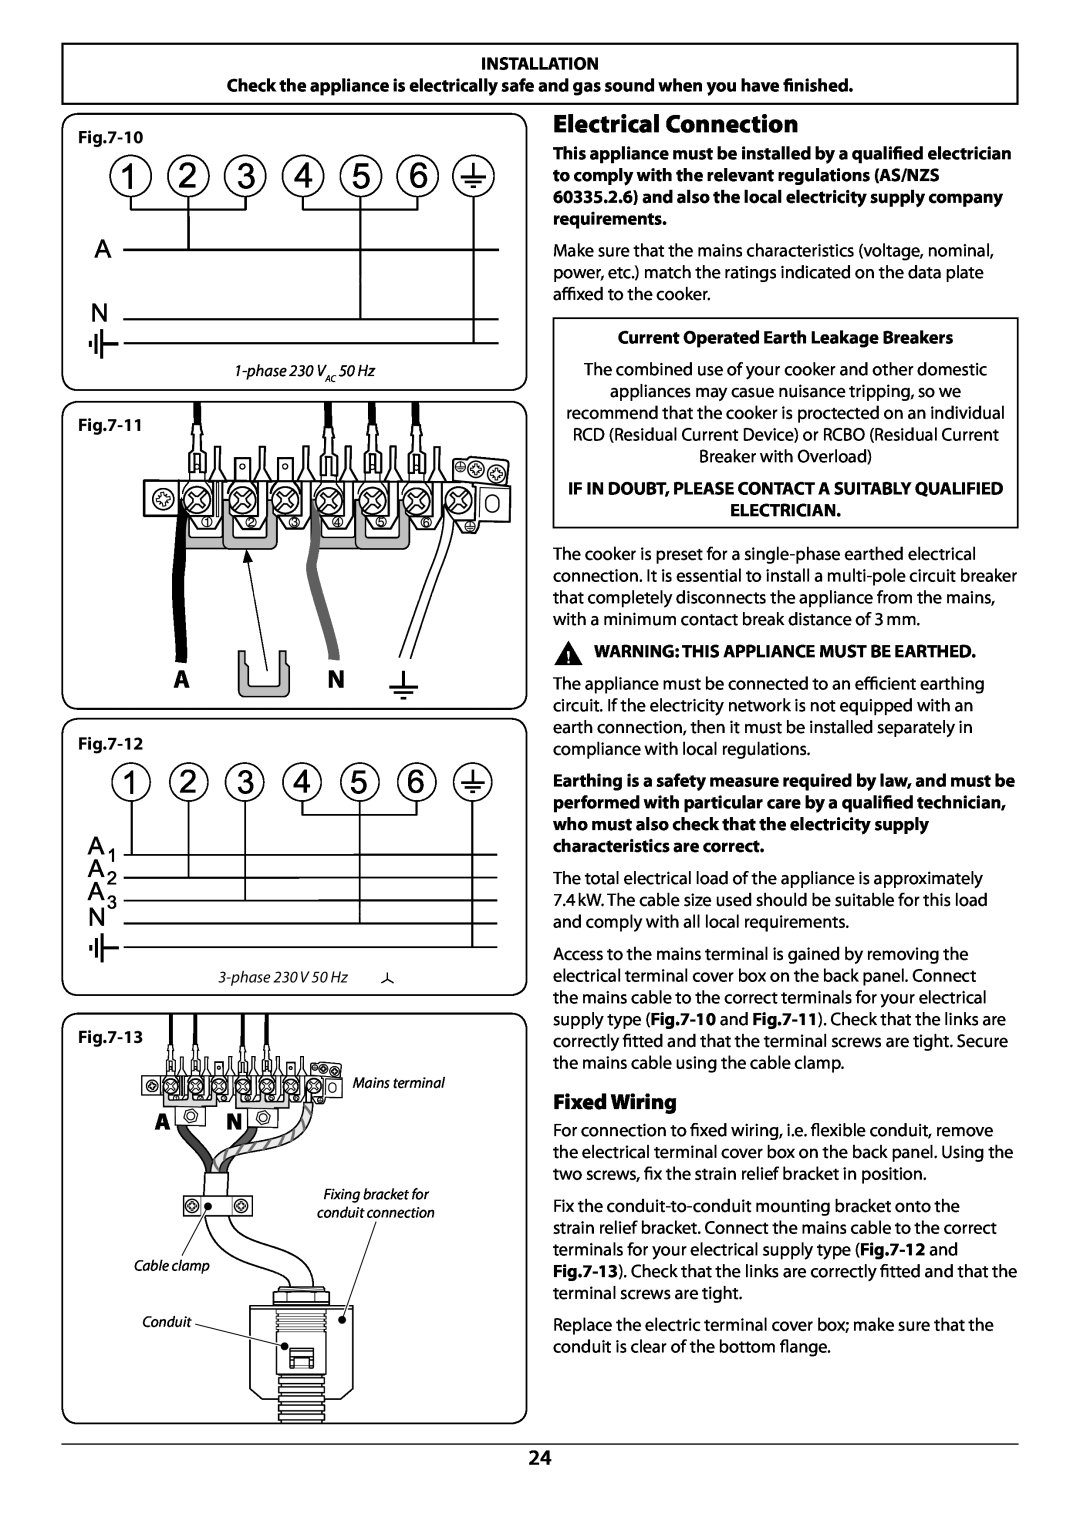 Falcon U108610-07 installation instructions A N, Fixed Wiring, 11, 12, 13, Current Operated Earth Leakage Breakers 